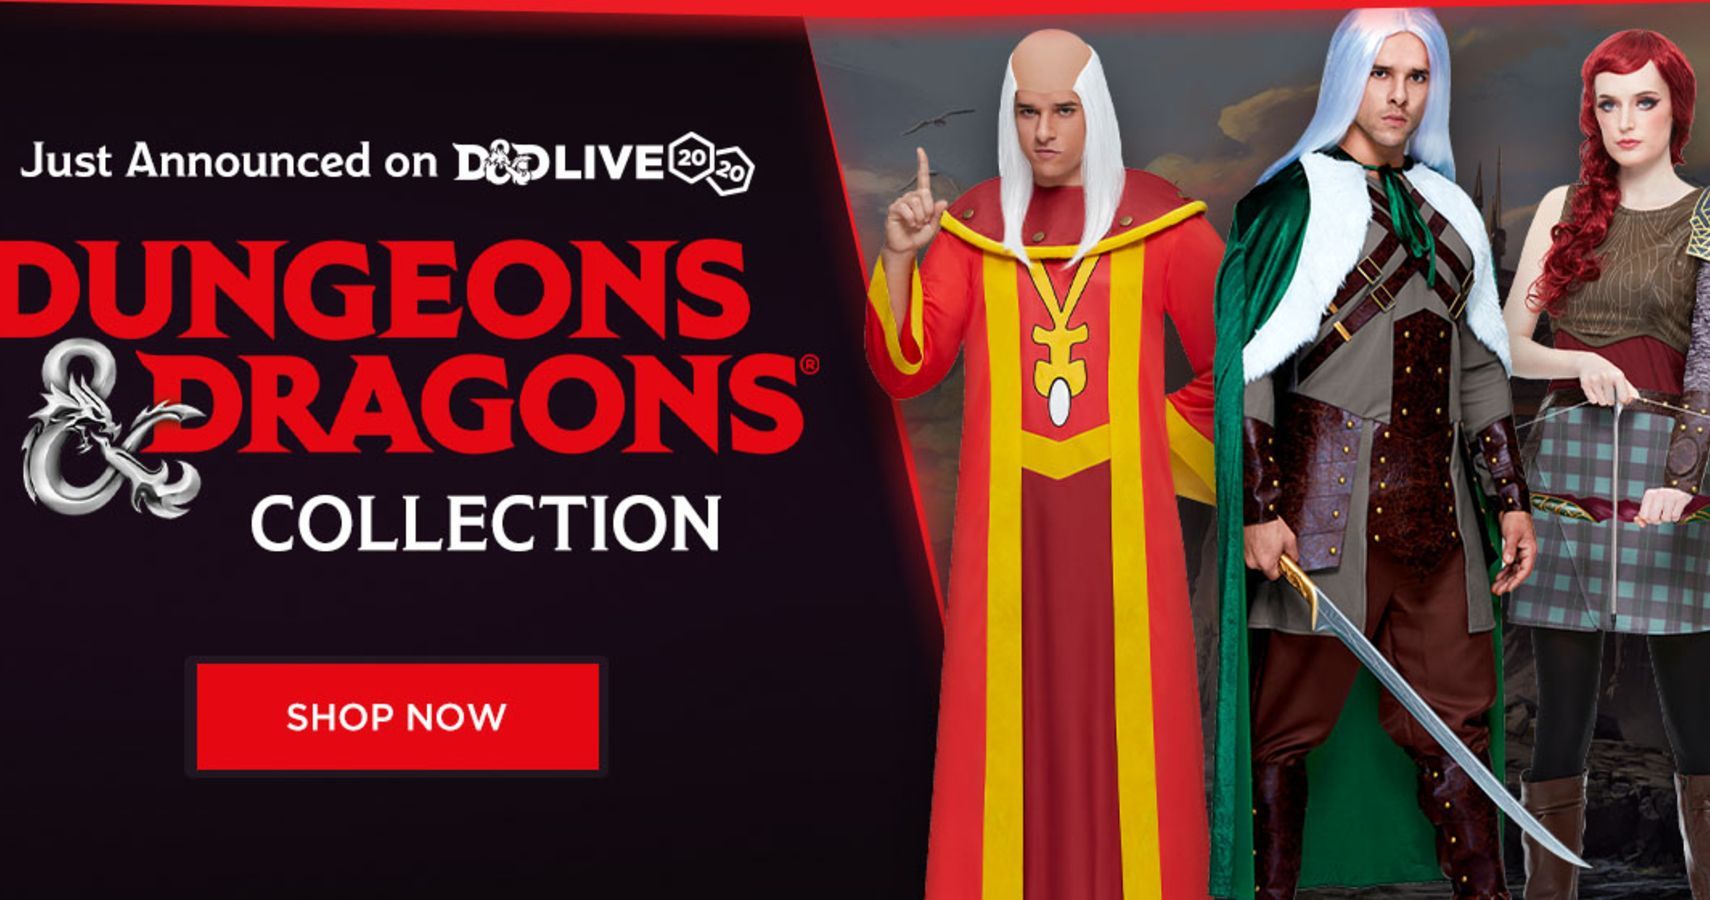 Dress Up Like Drizzt With Official D&D Halloween Costumes